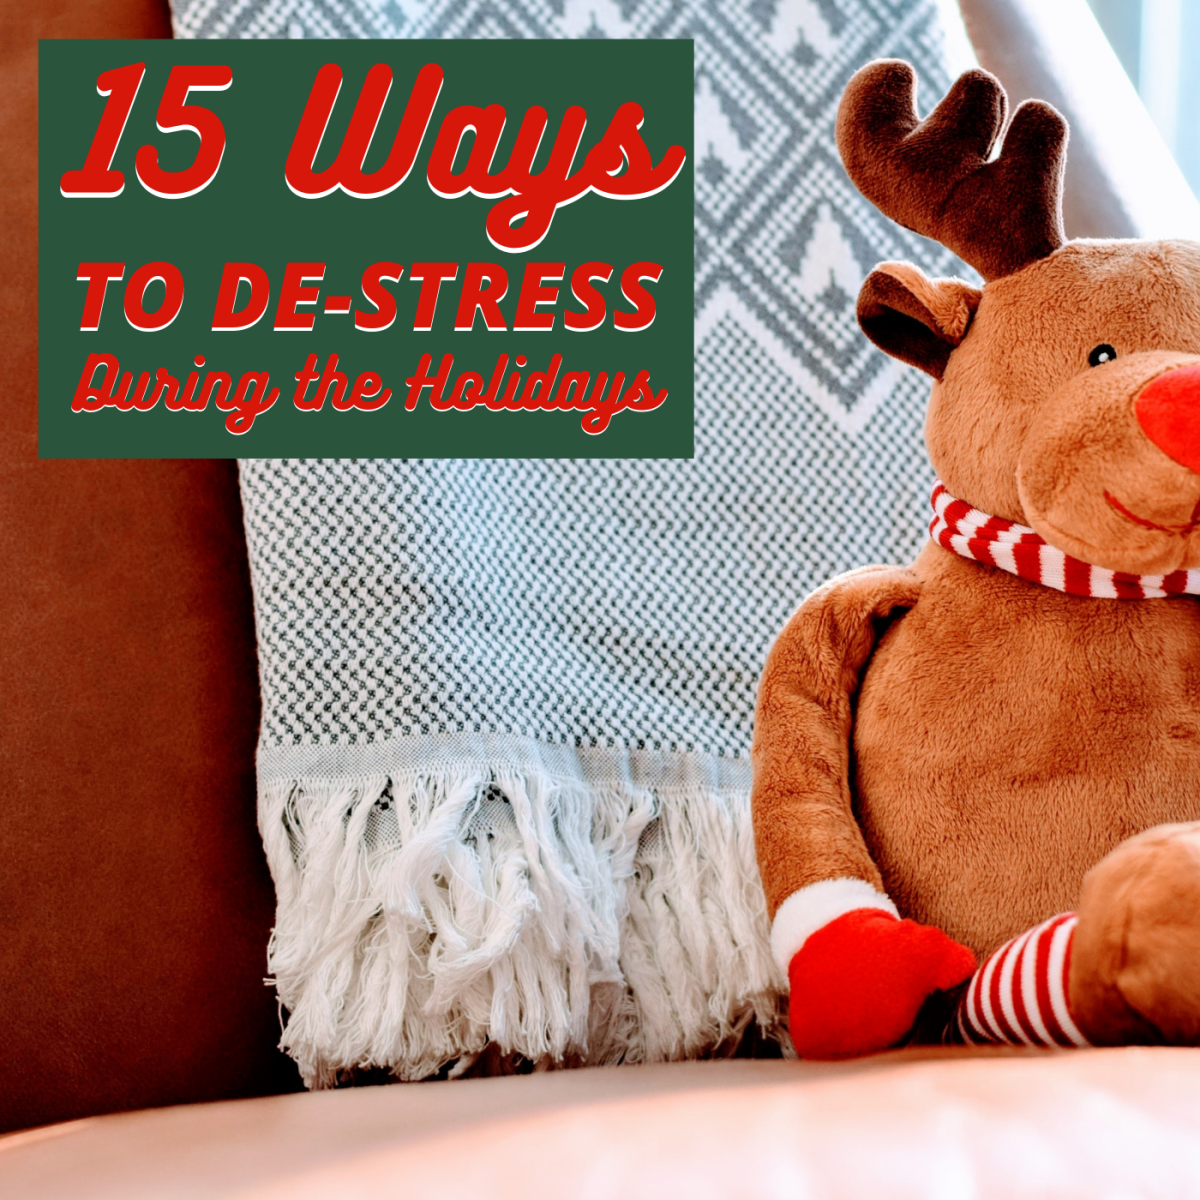 Reduce holiday stress with these simple ideas. 